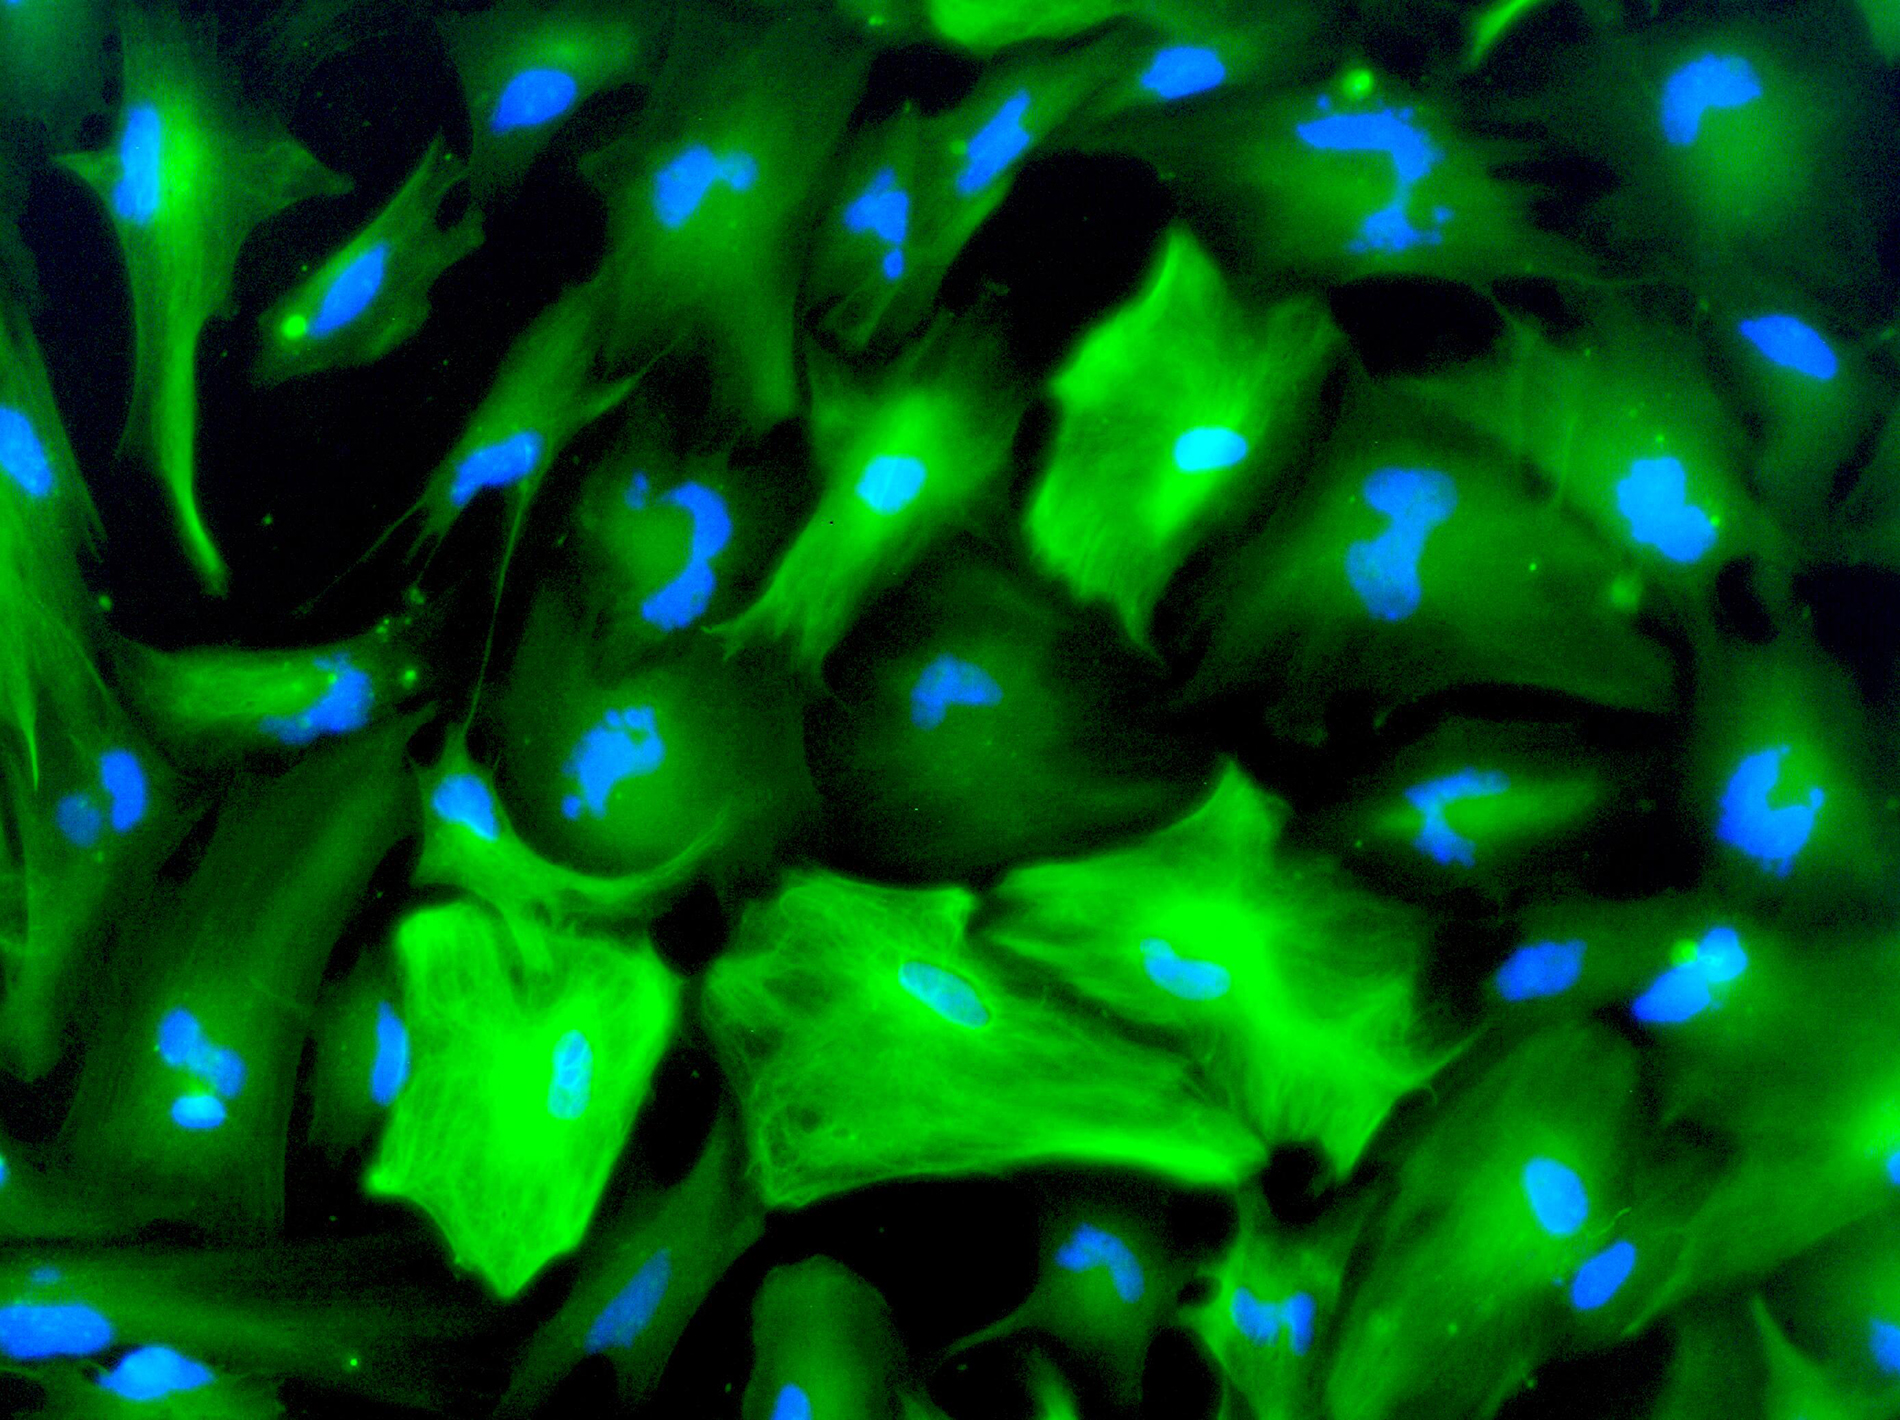 Astrocytes in blue and green, derived from human neural stem cells.